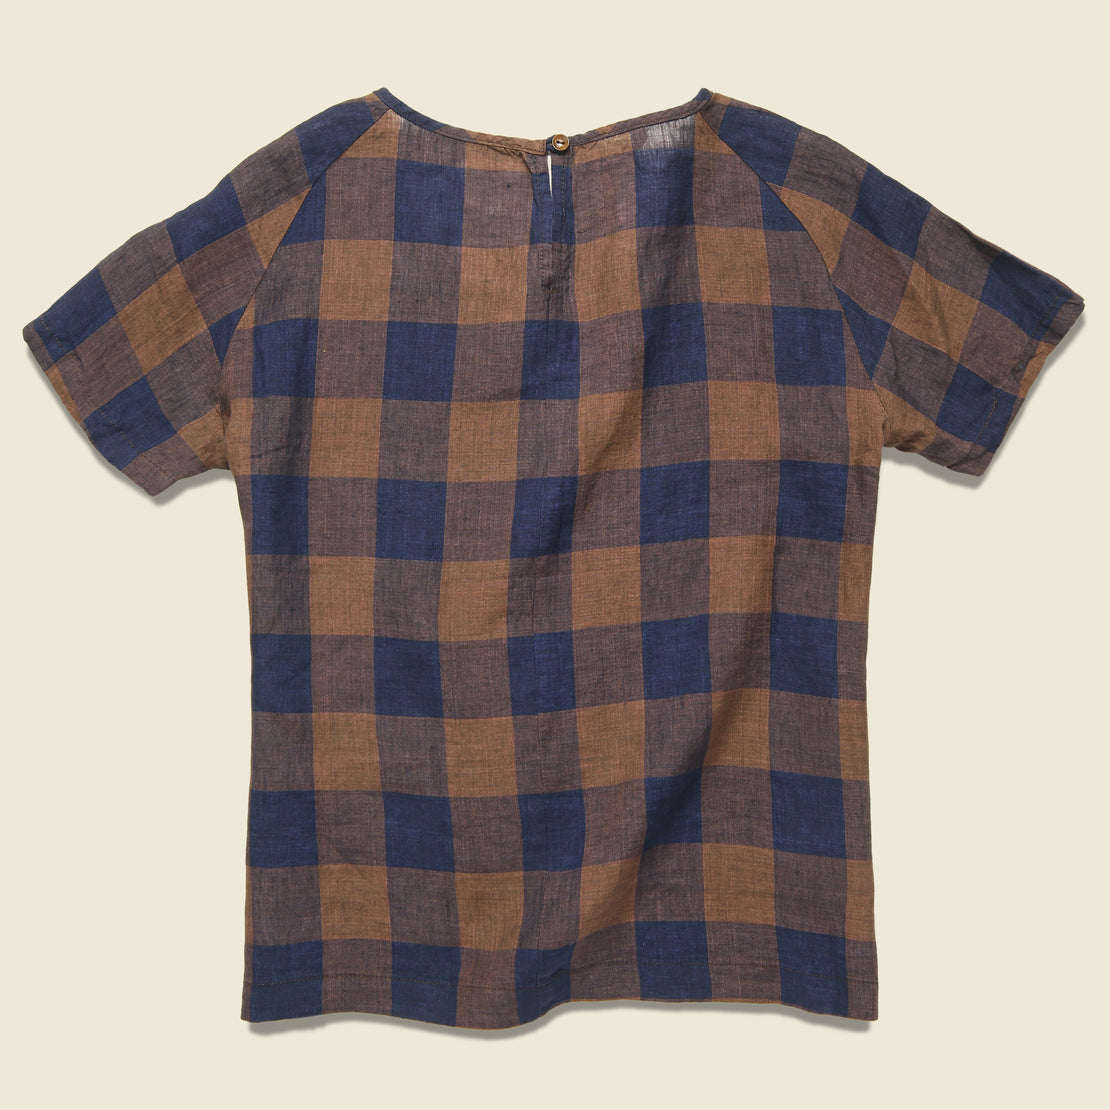 Reese Top - Navy/Rust Gingham - Bridge & Burn - STAG Provisions - W - Tops - S/S Woven